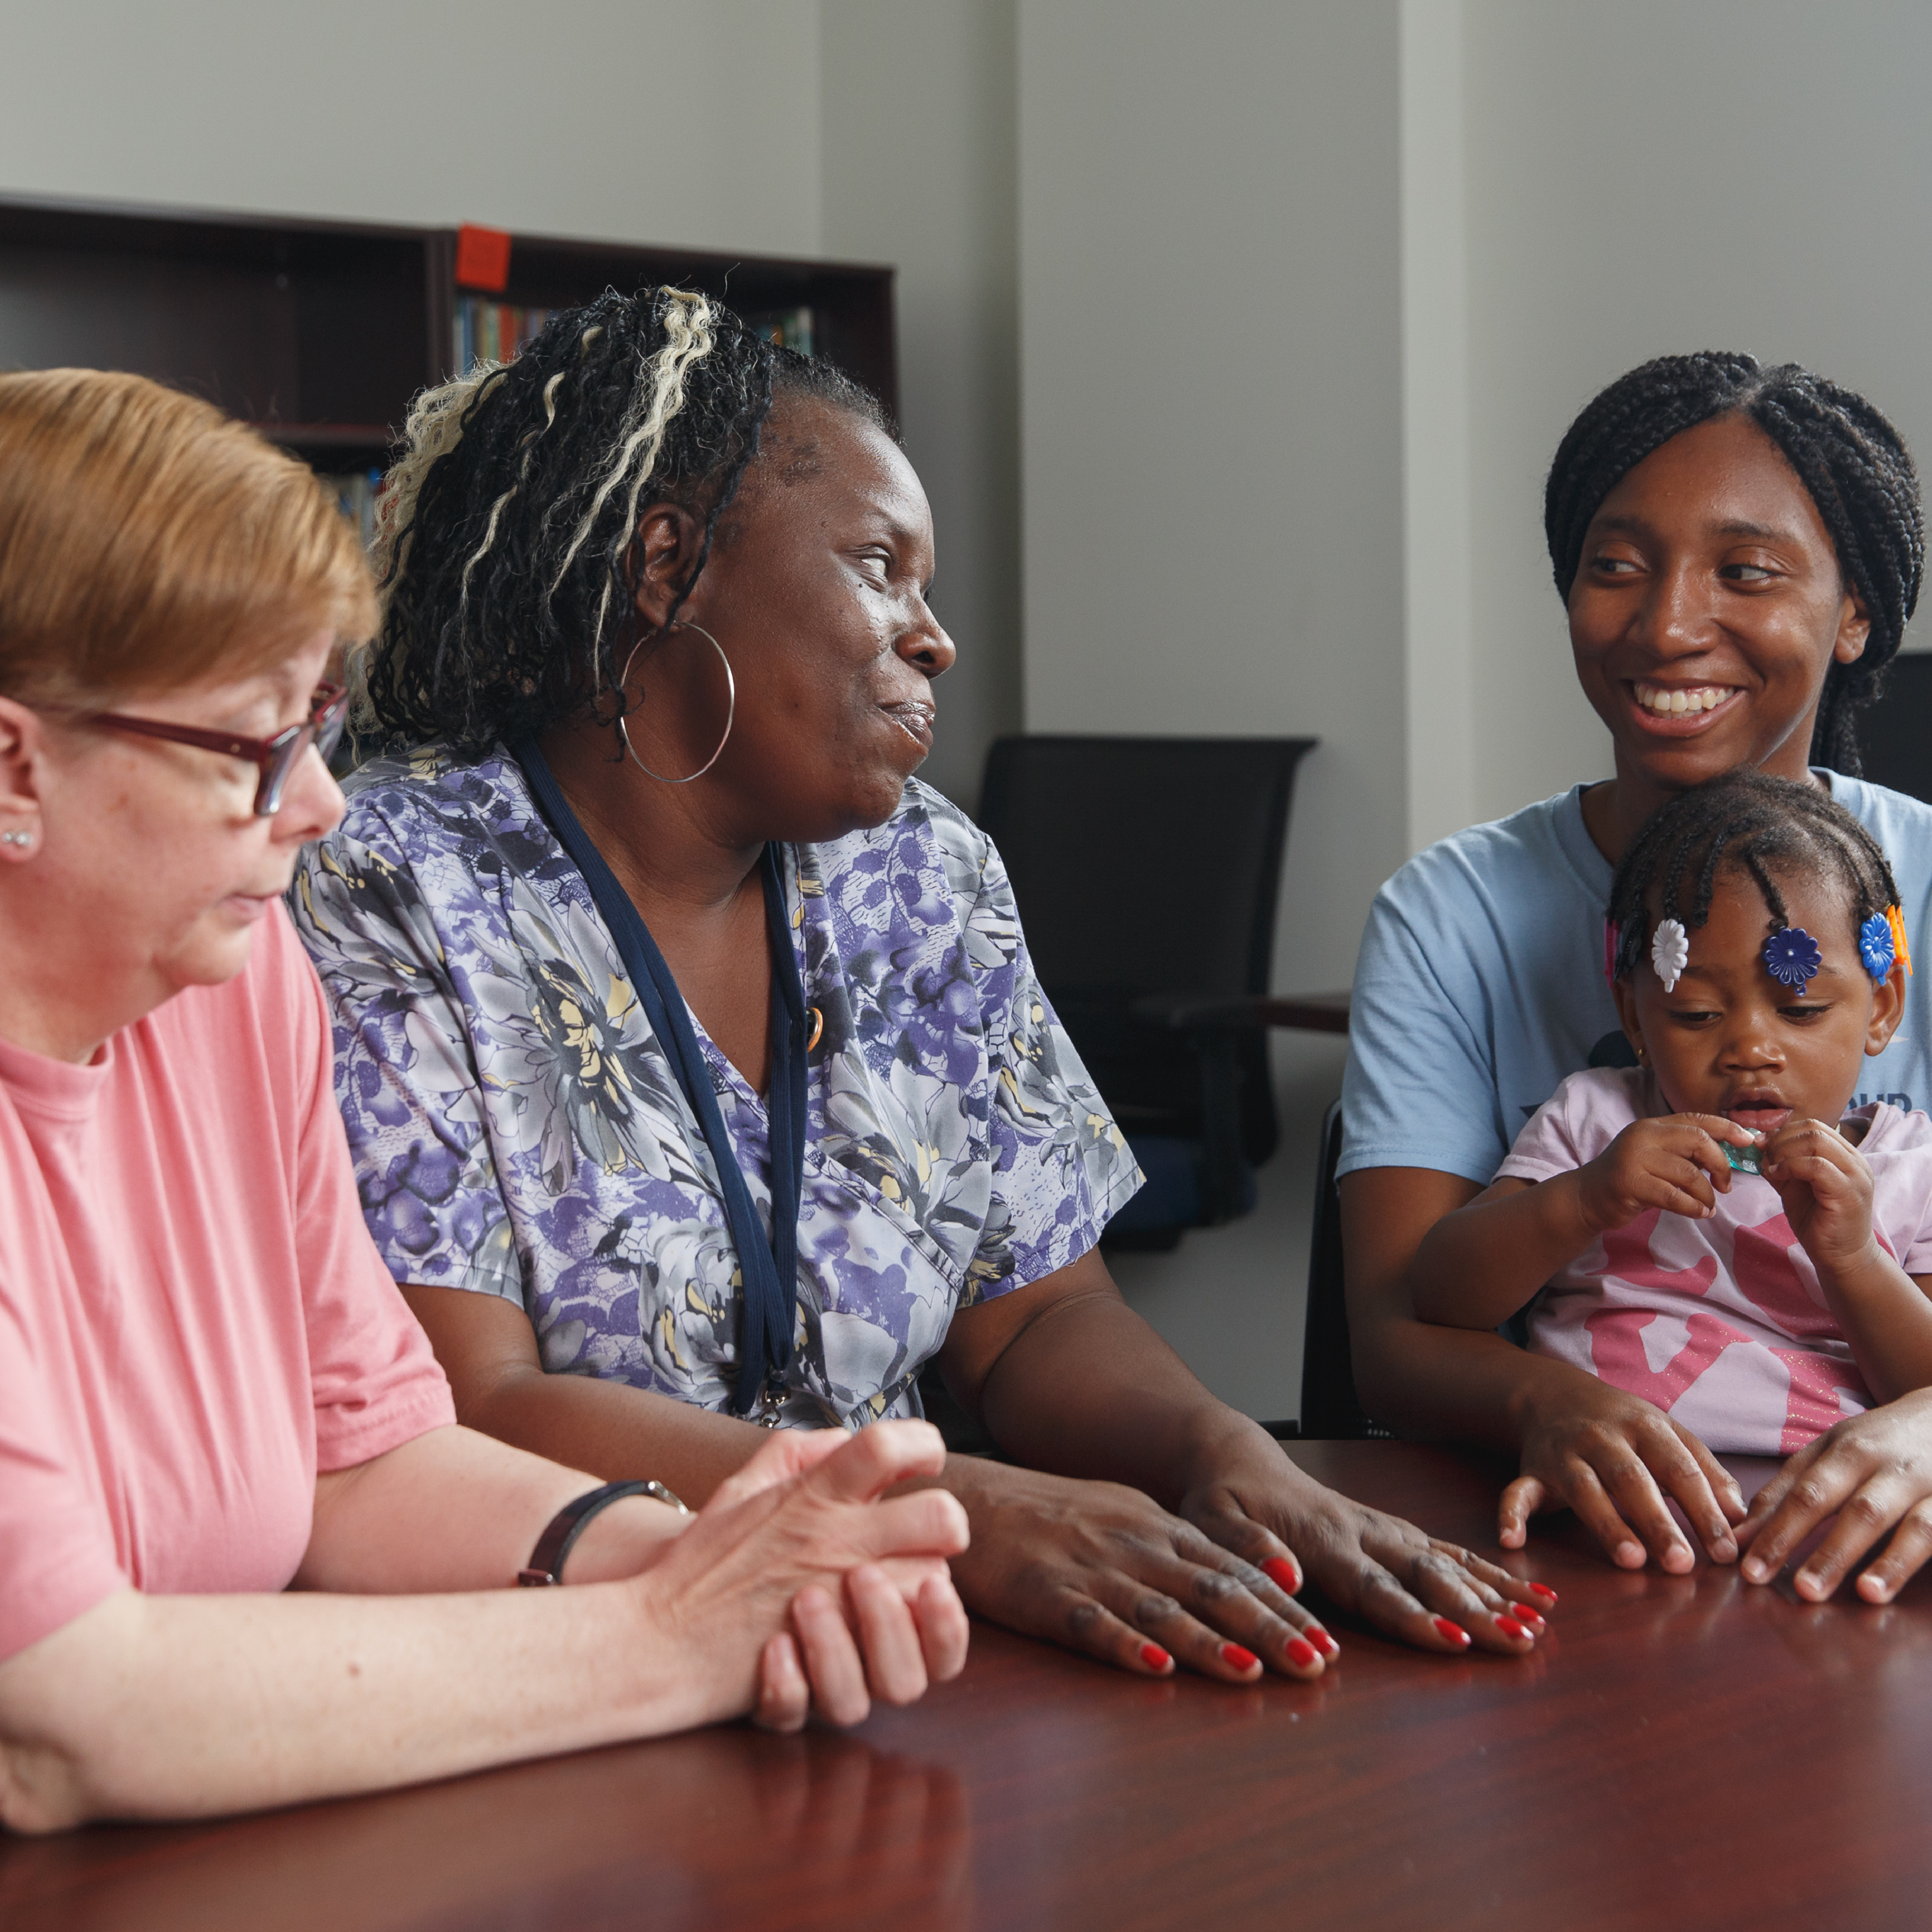 Mothers at St. Barnabas Mission are not alone on their journeys